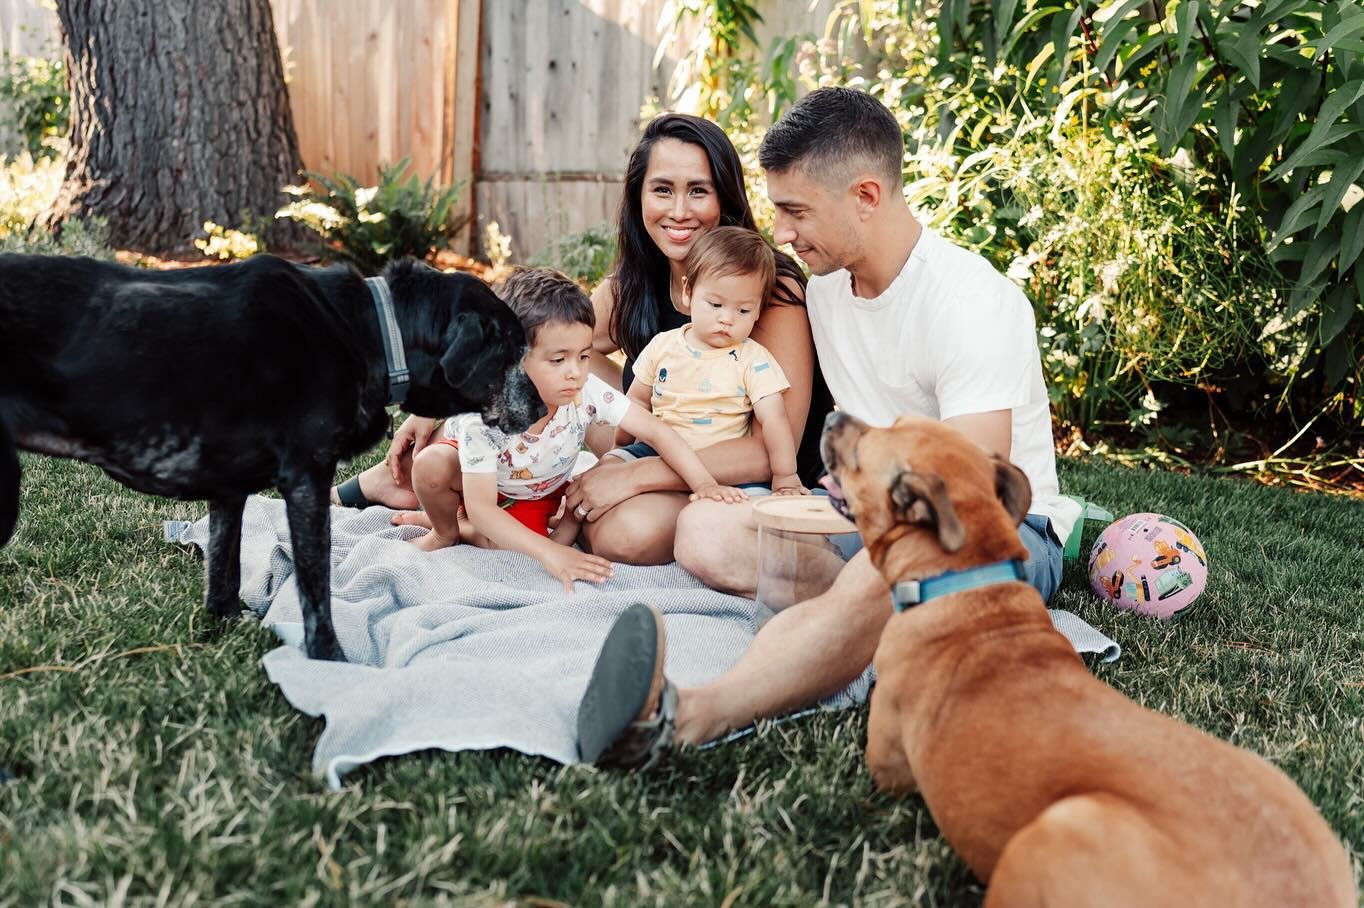 And I repeat: all you need for wonderful family photos is to show up. Go out in the yard and play with your pups. Let your kids feed them too many treats. Drink a glass of wine and pick some blueberries. Wear something nice, sure, but no need for fan